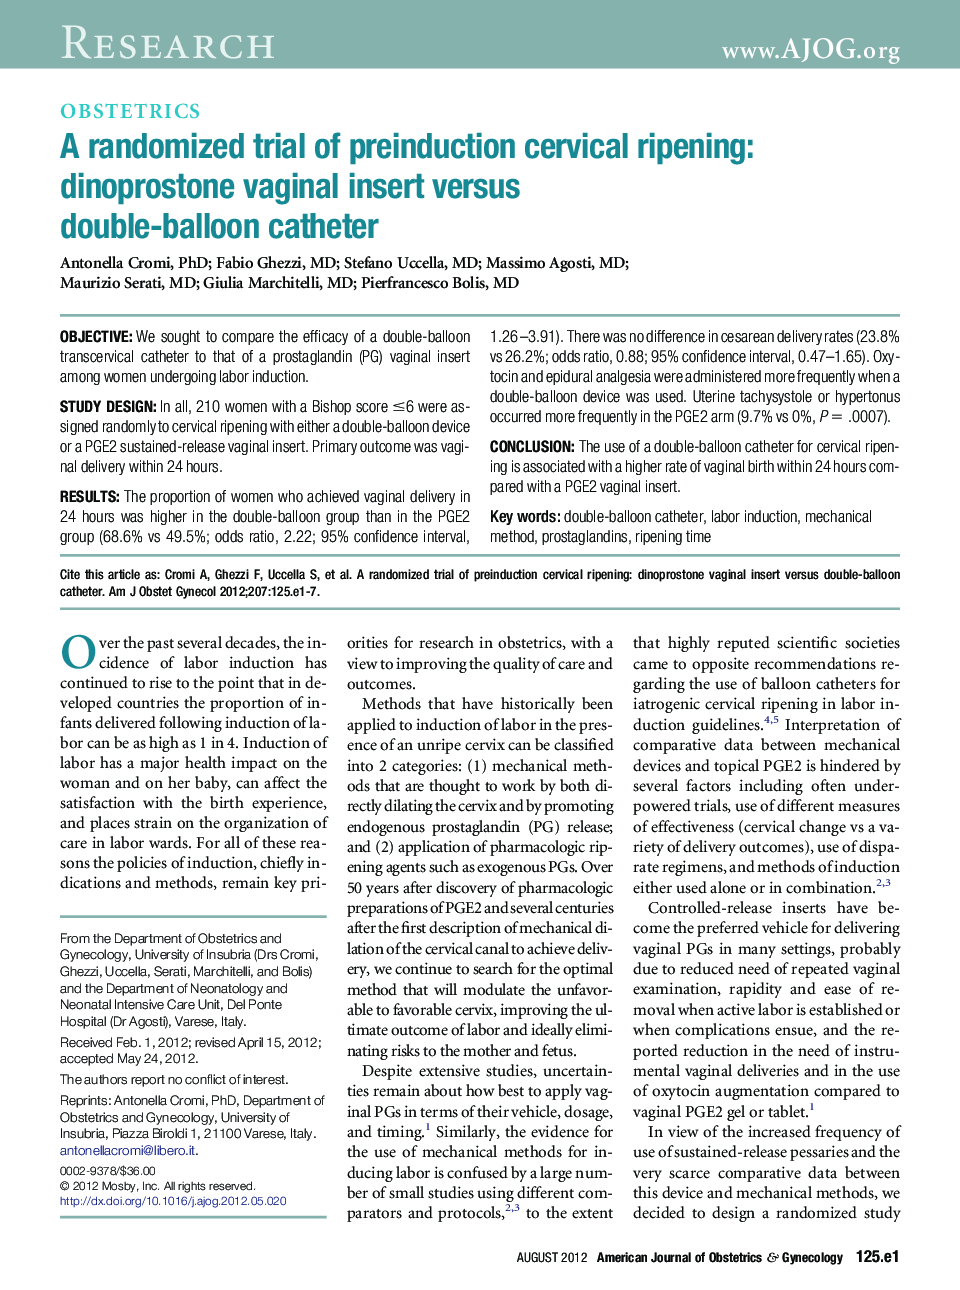 A randomized trial of preinduction cervical ripening: dinoprostone vaginal insert versus double-balloon catheter